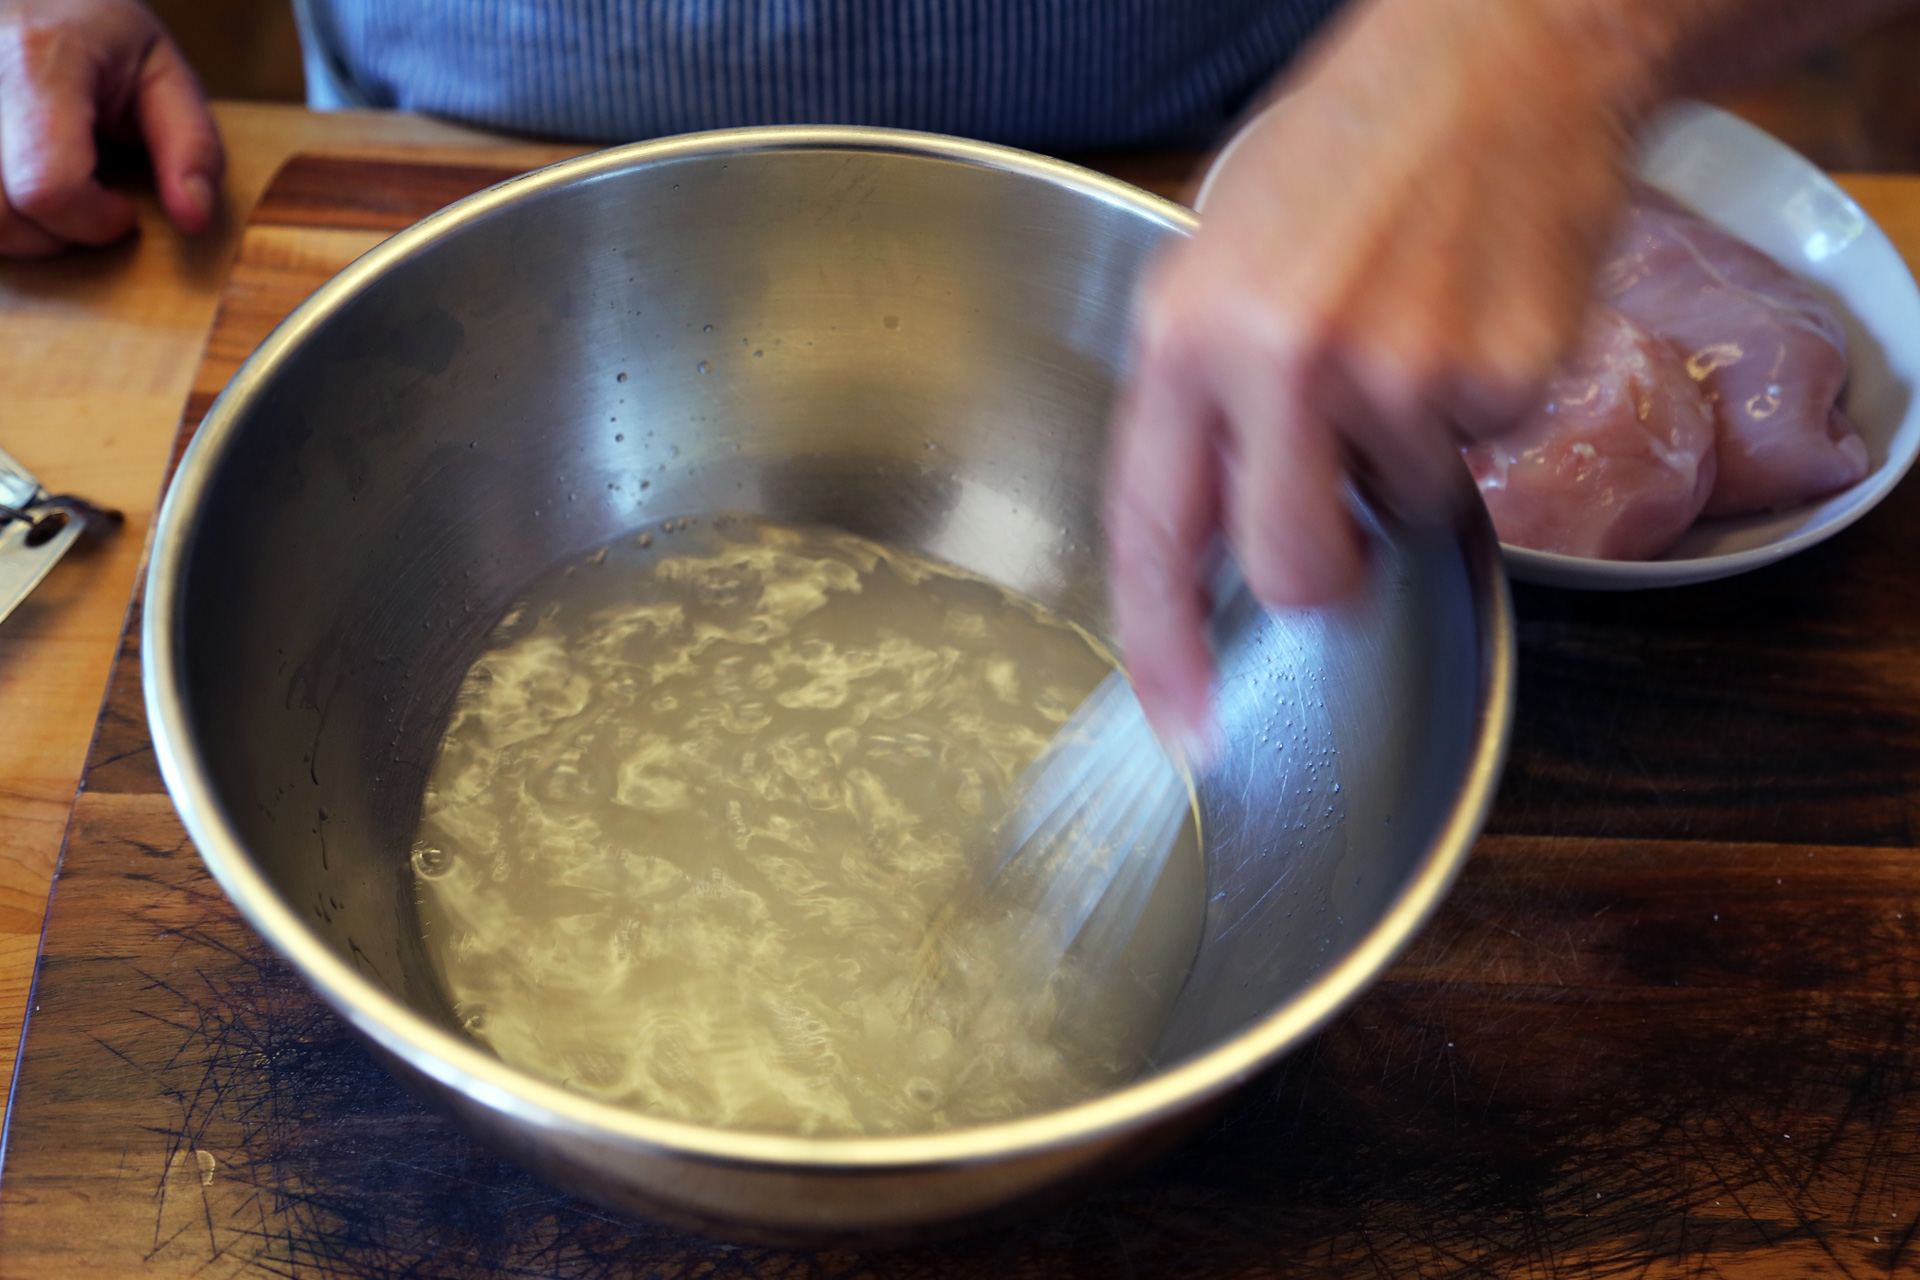 In a bowl, stir together 1 cup hot water with the salt and sugar, until dissolved. Add 3 cups very cold water and stir until combined.